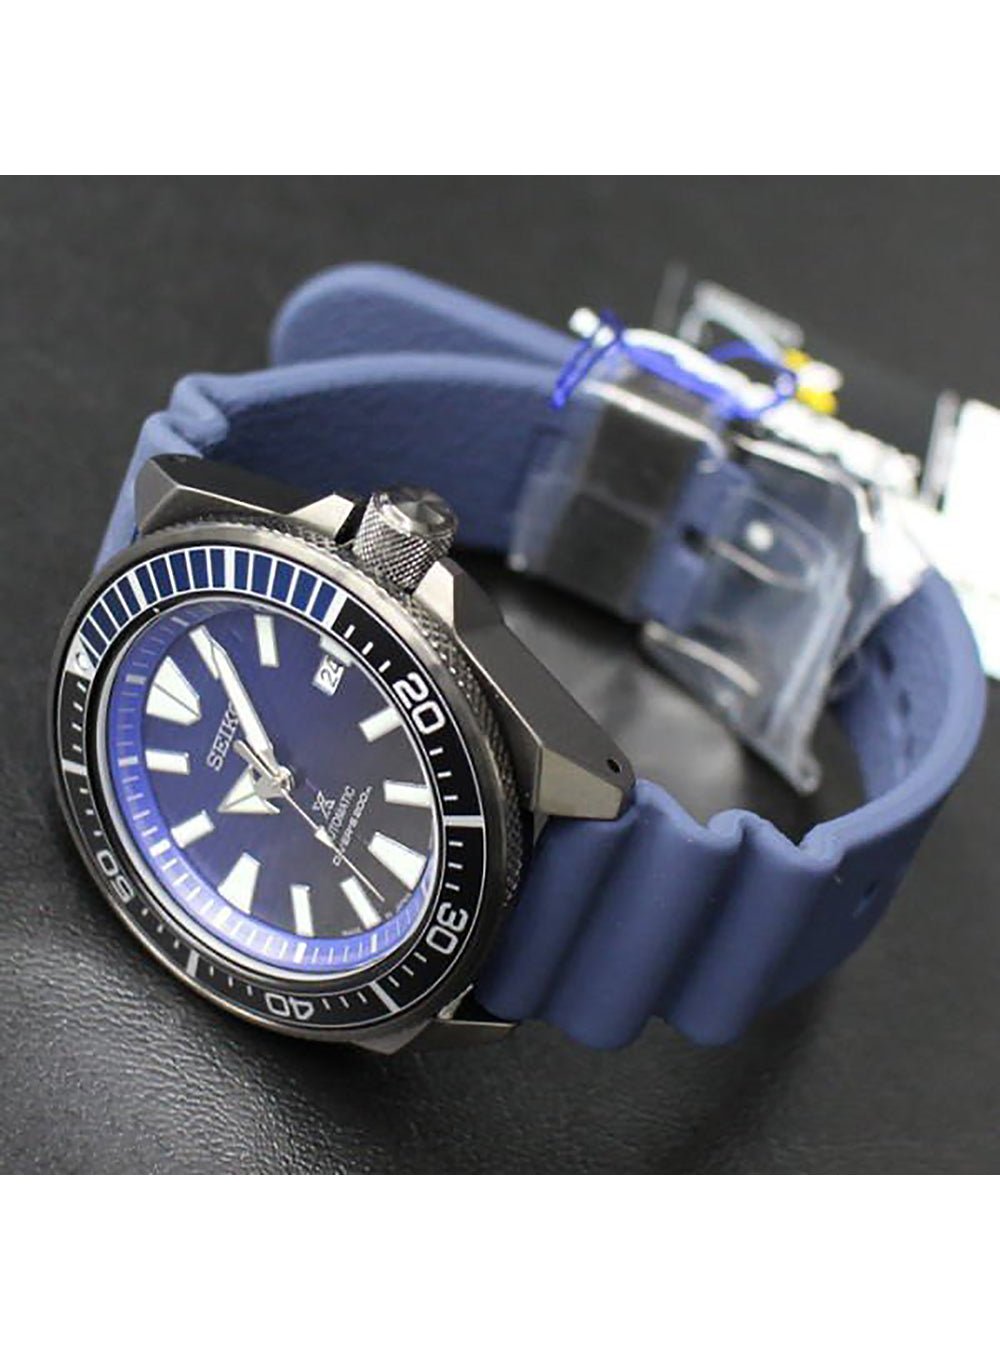 SEIKO PROSPEX SAMURAI SBDY025 200M DIVE SAVE THE OCEAN SPECIAL EDITION MADE IN JAPAN JDMWRISTWATCHjapan-select